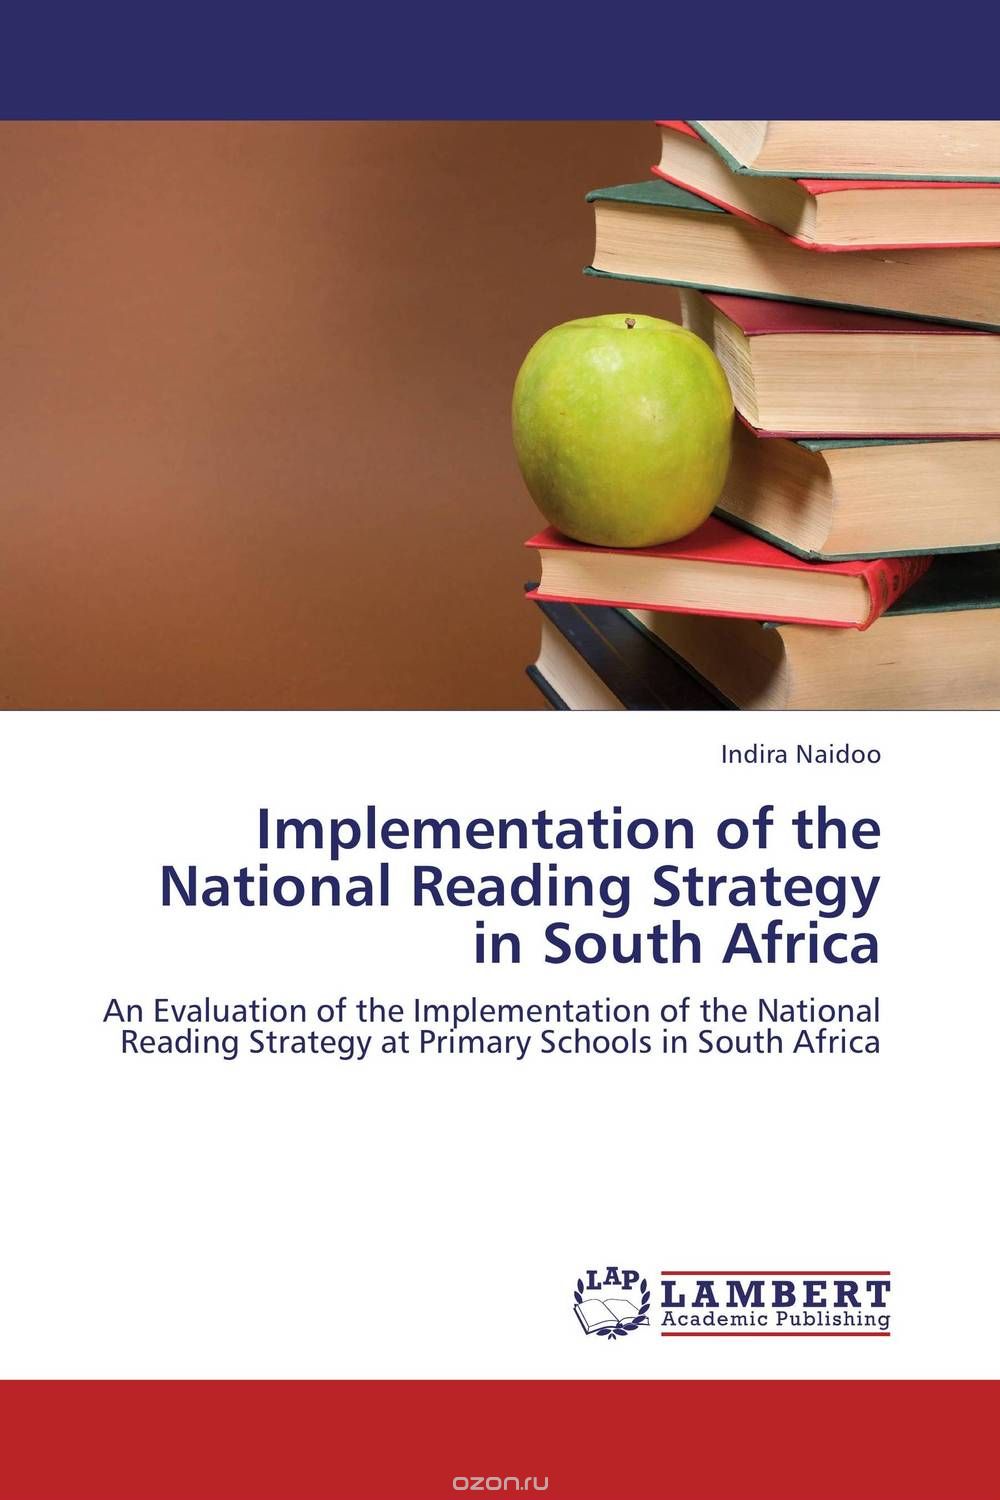 Скачать книгу "Implementation of the National Reading Strategy in South Africa"